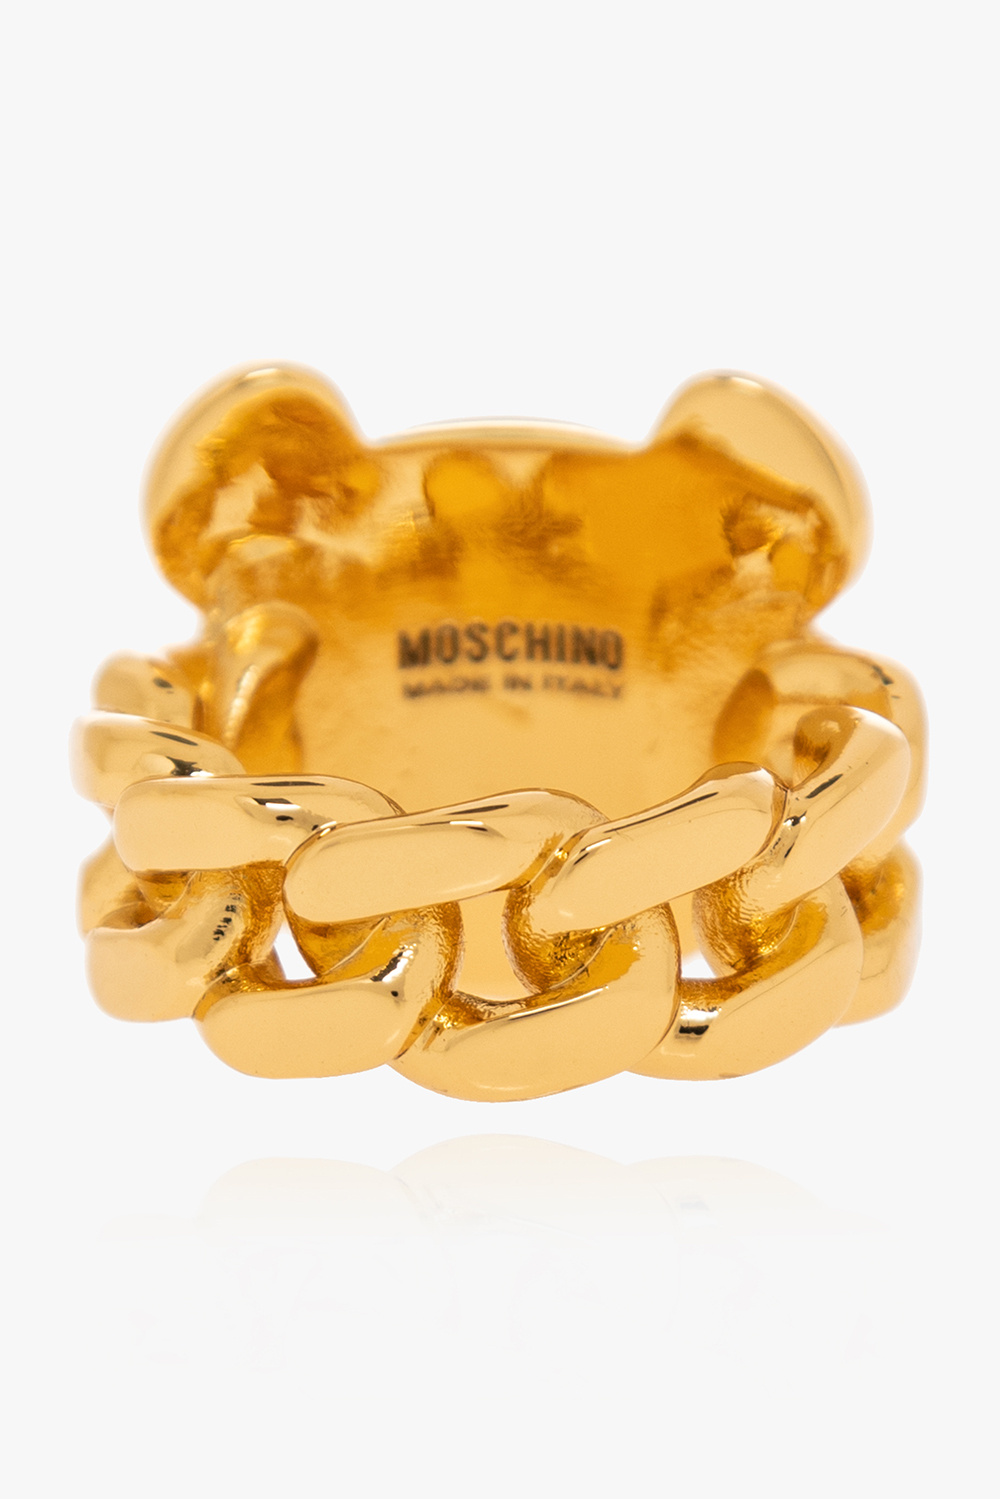 Moschino for the perfect gift that will delight everyone